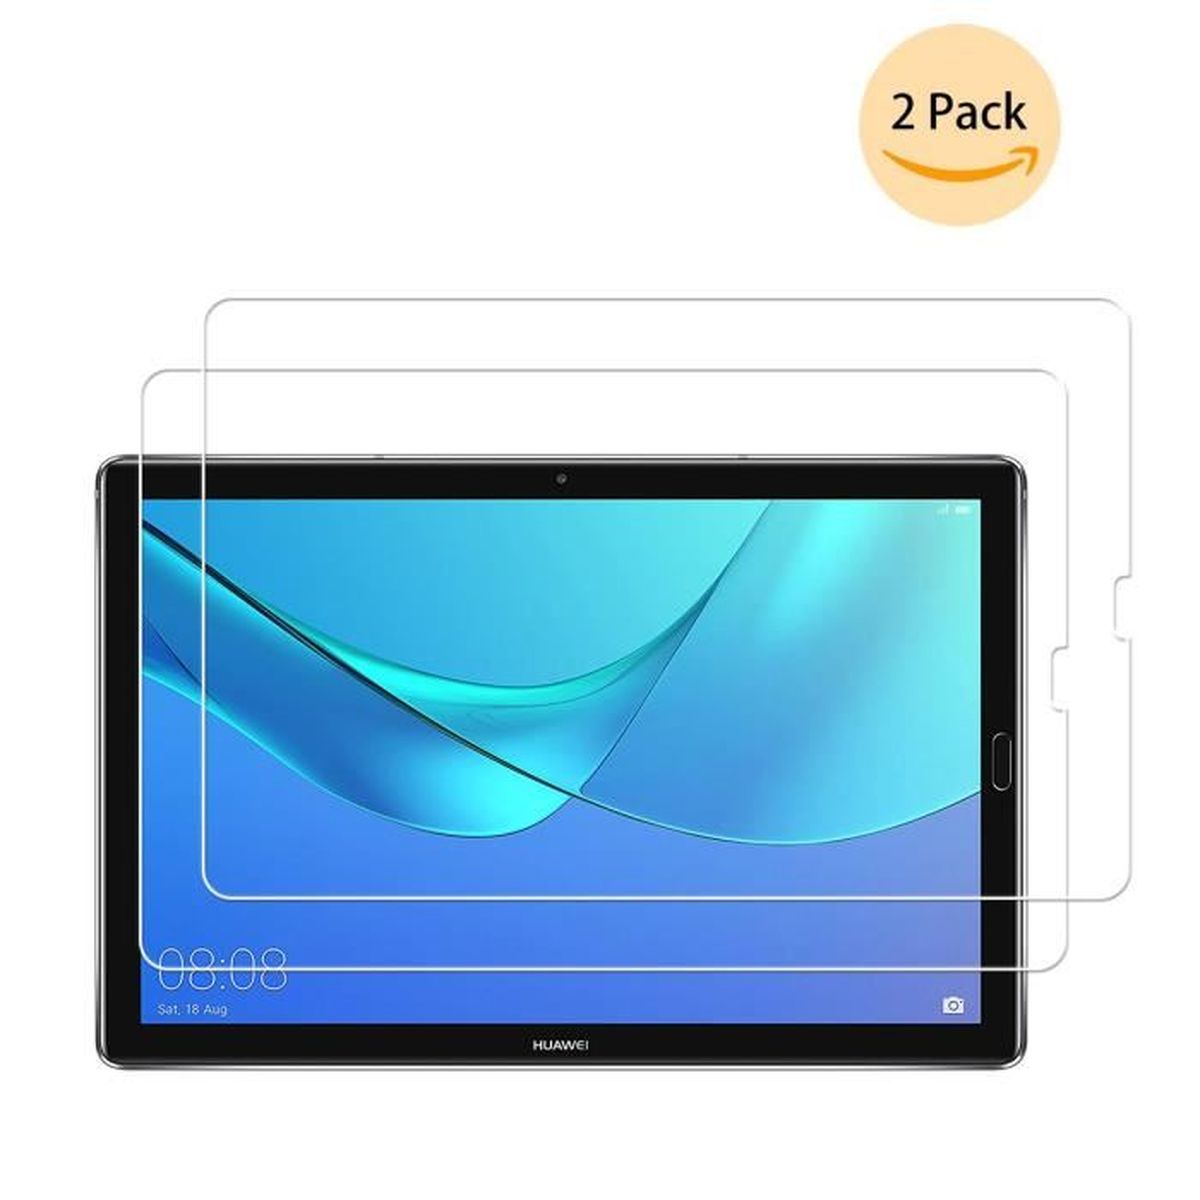 Huawei tablette matepad t 8 - Cdiscount